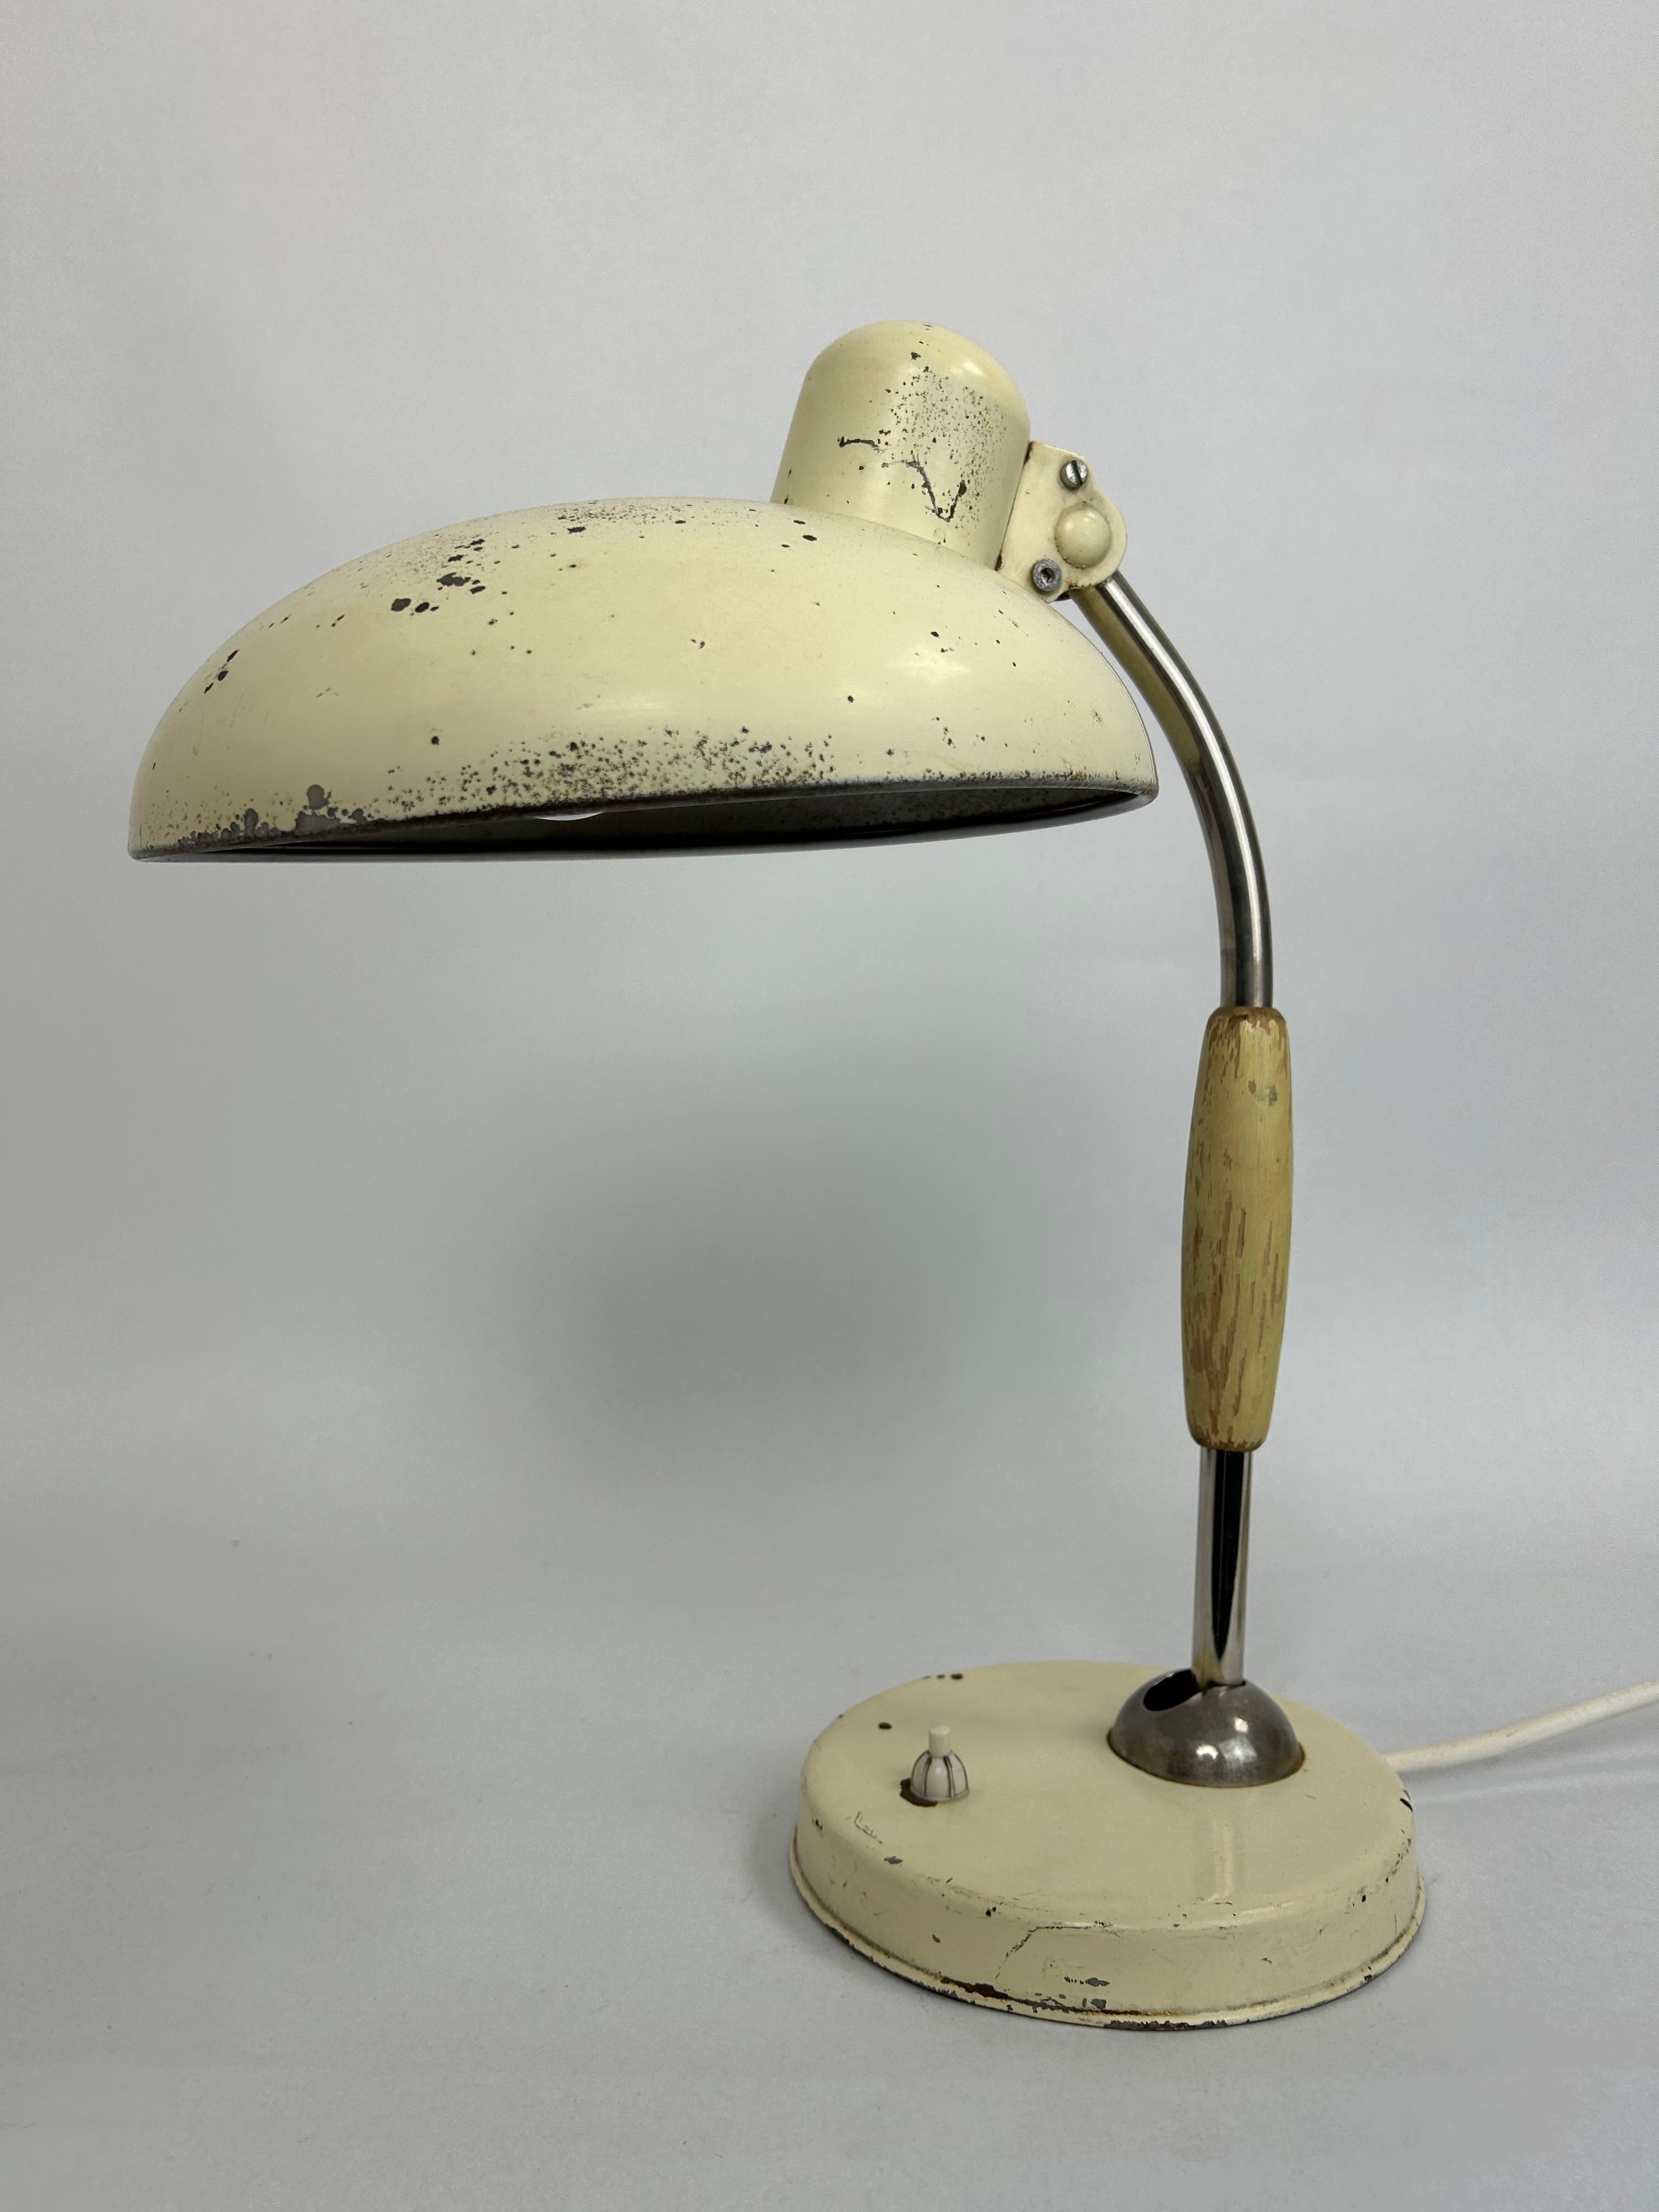 White bauhaus table lamp by Christian Dell for Koranda OVE Austria in original vintage condition.